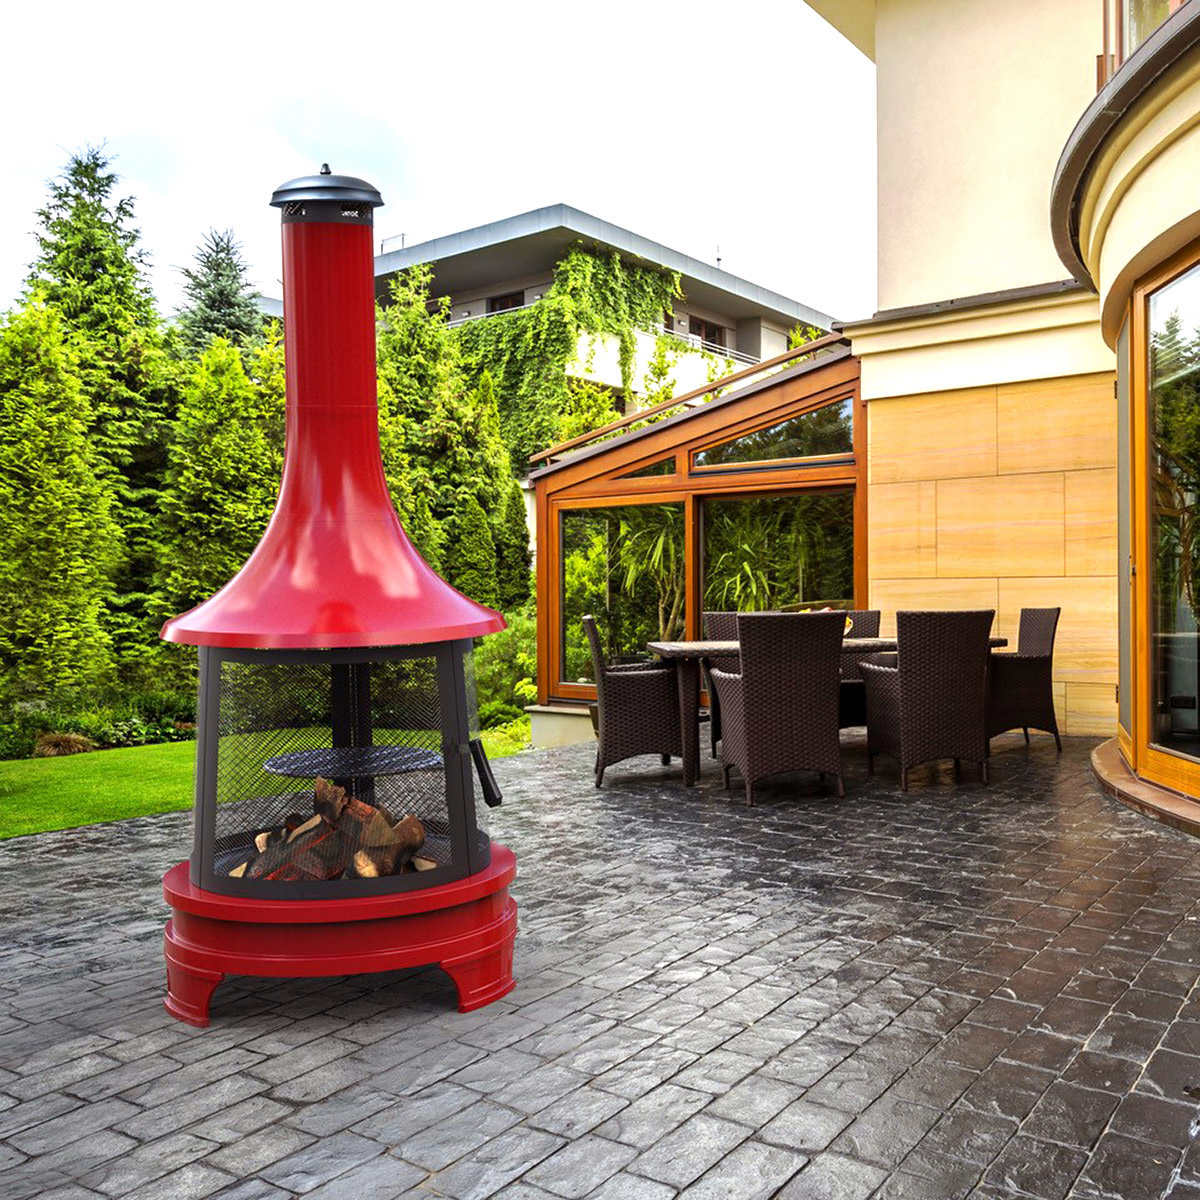 Outdoor Fireplace With Cooking Grill, Outdoor Metal Fireplace With Chimney